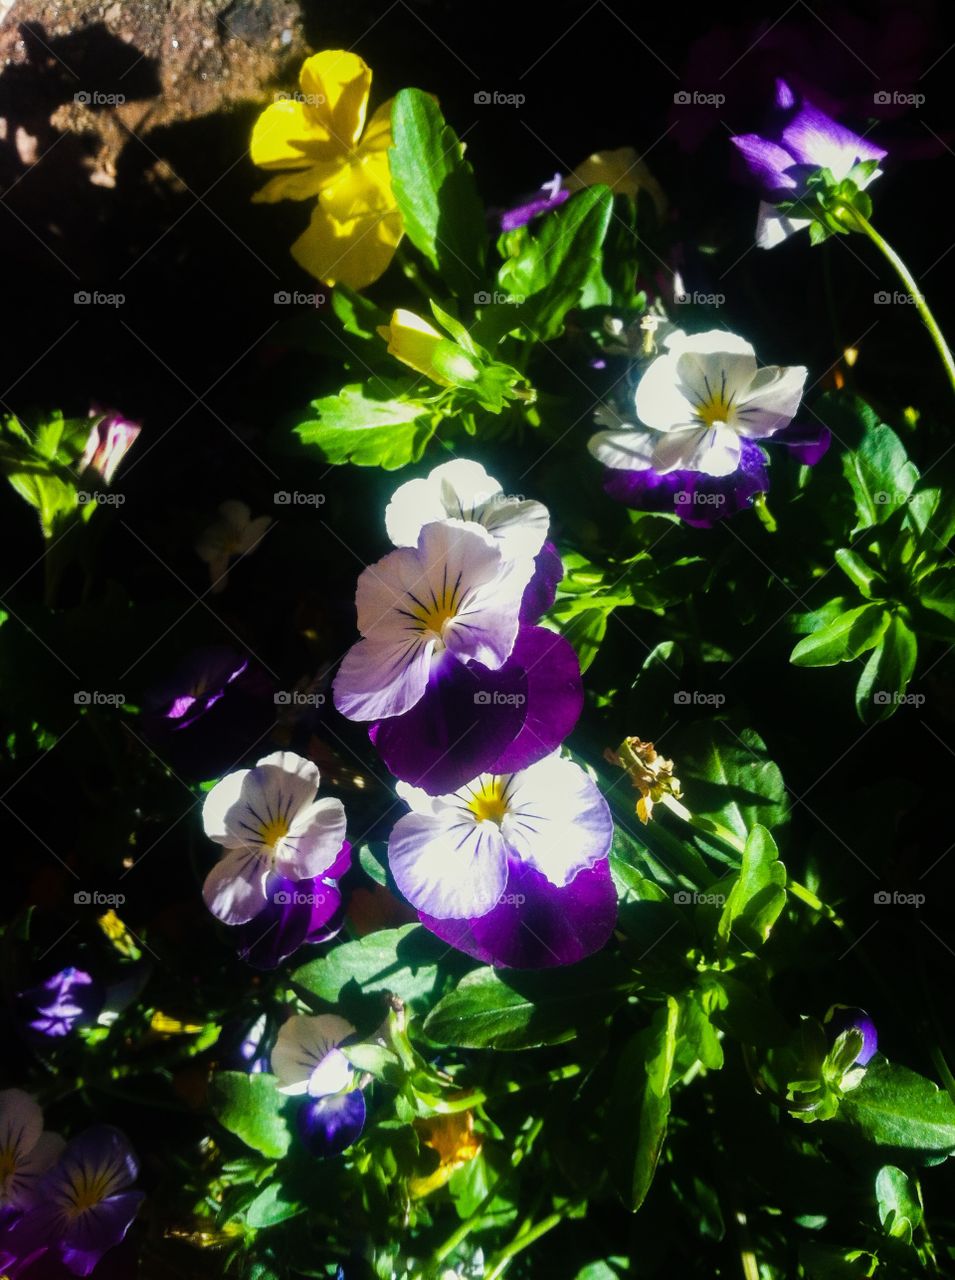 Bright purple and yellow pansies, wild flowers in a park 